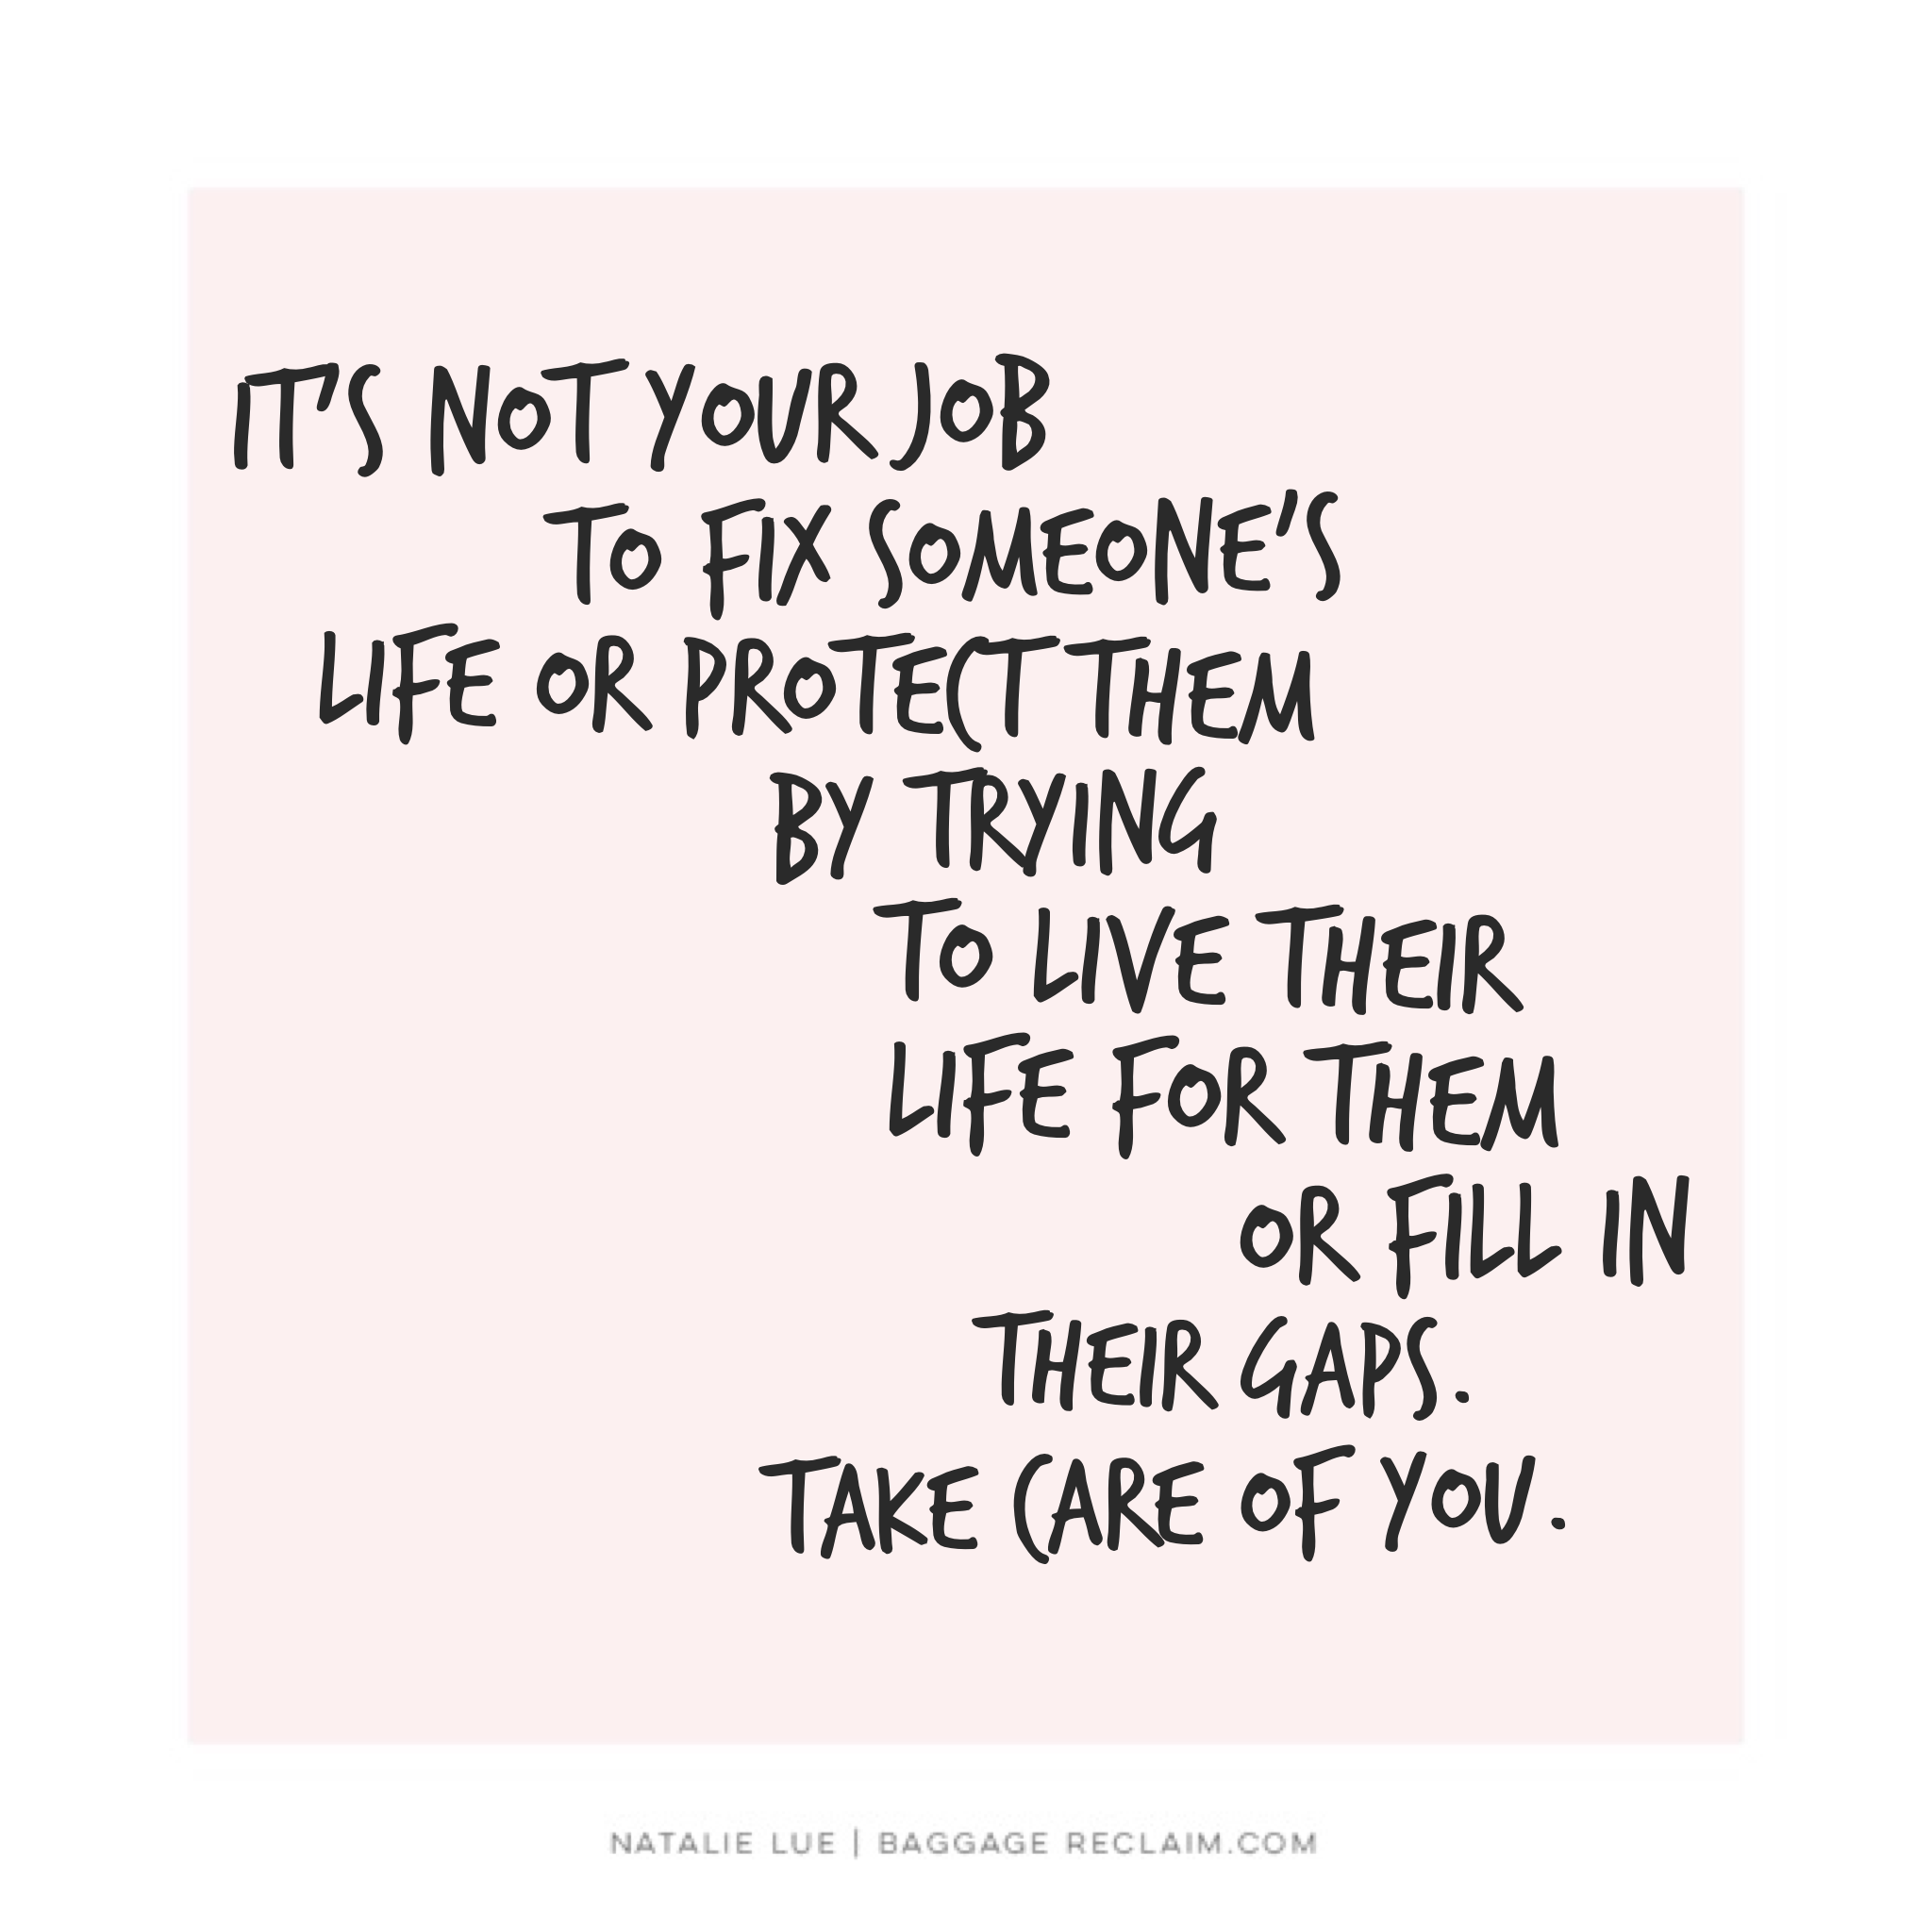 It's not your job to fix someone's life or protect them by trying to live their life for them or fill in their gaps. Take care of you.